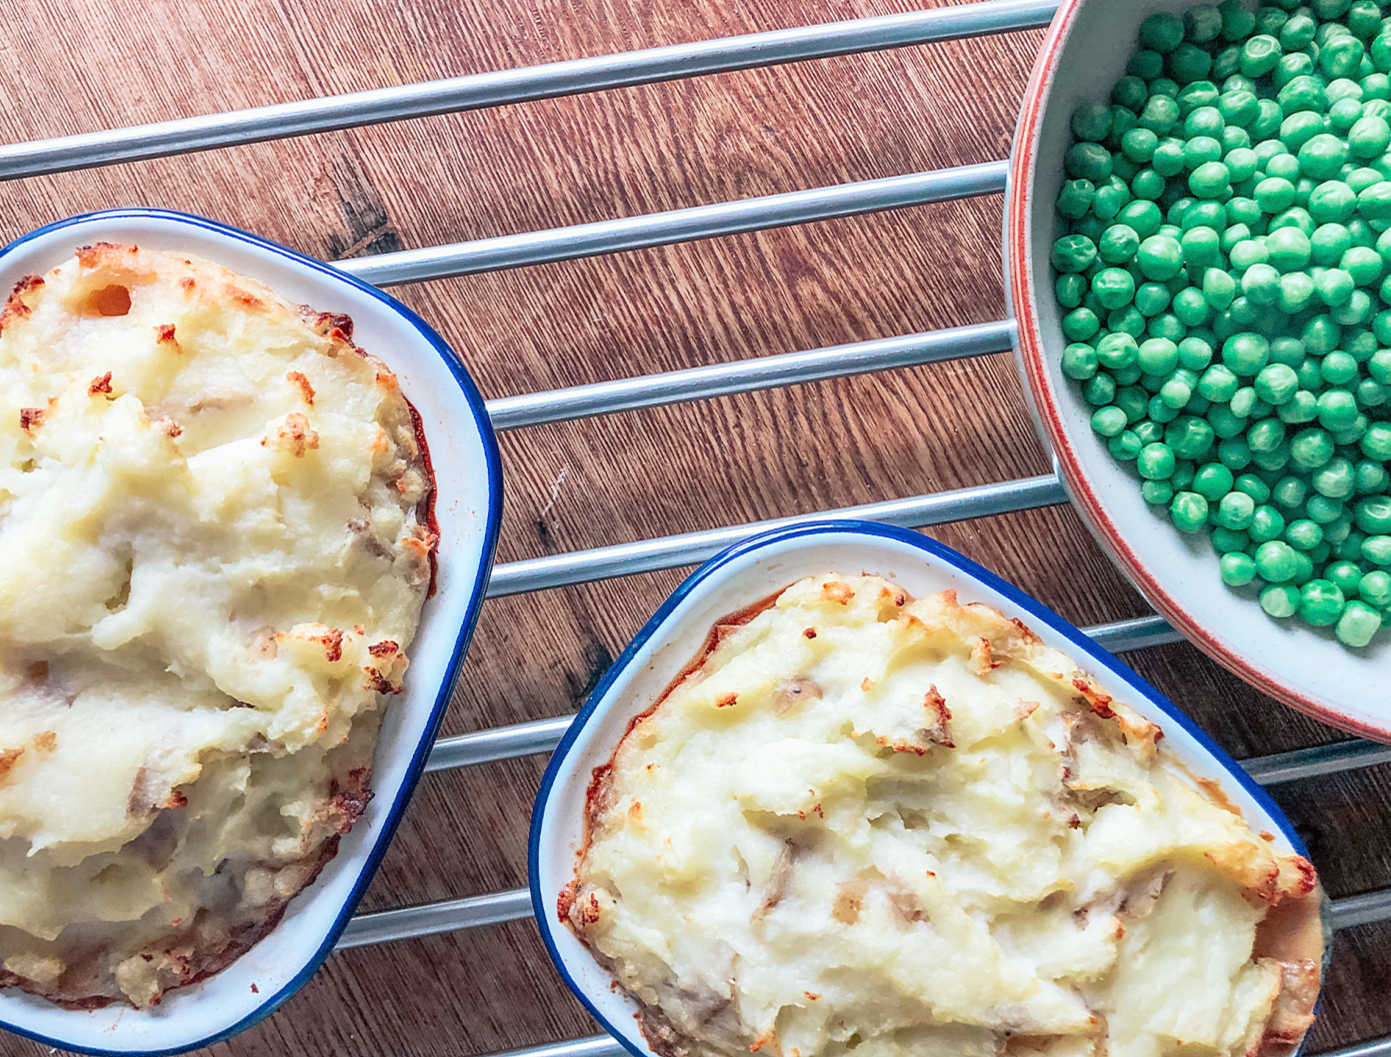 Slow how to make slow cooker Steak and ale pie